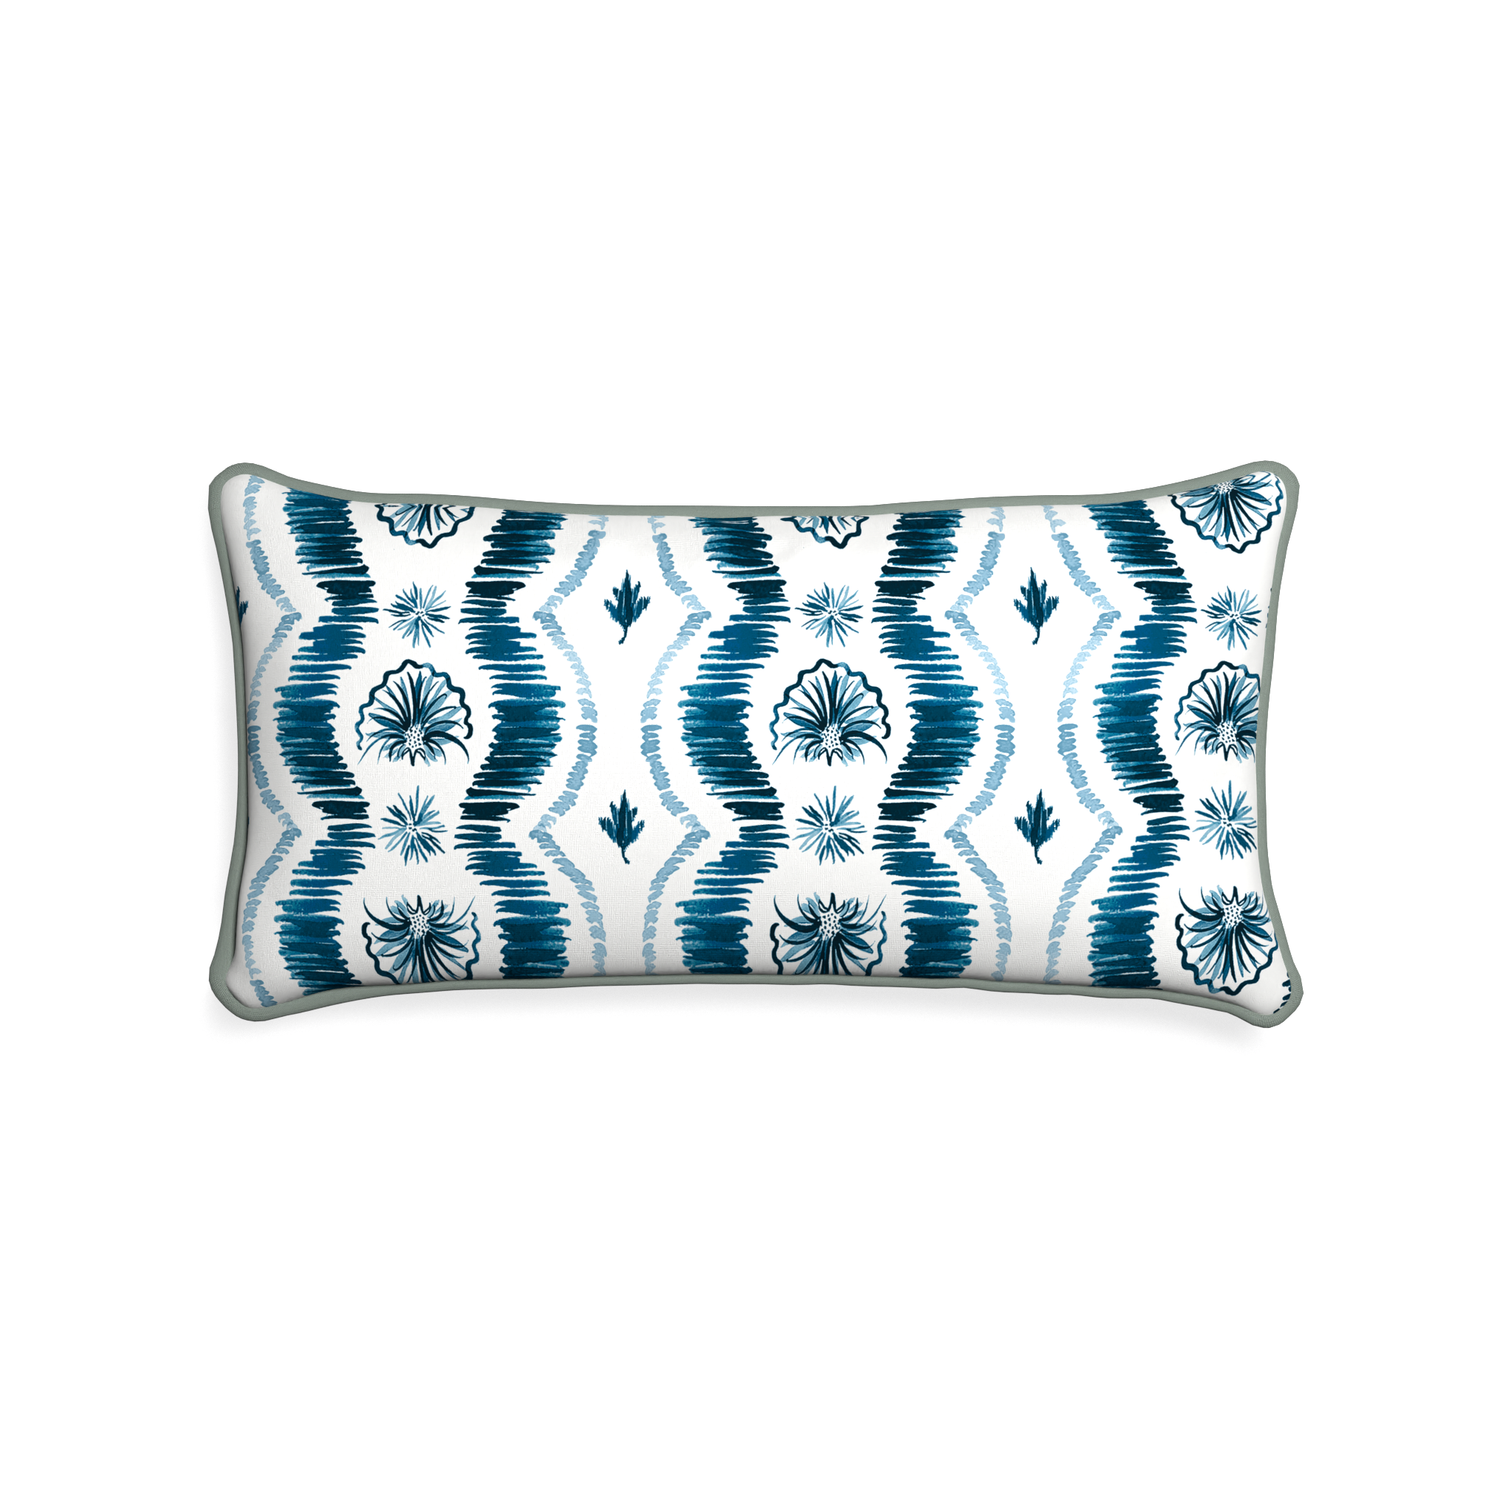 Midi-lumbar alice custom blue ikatpillow with sage piping on white background